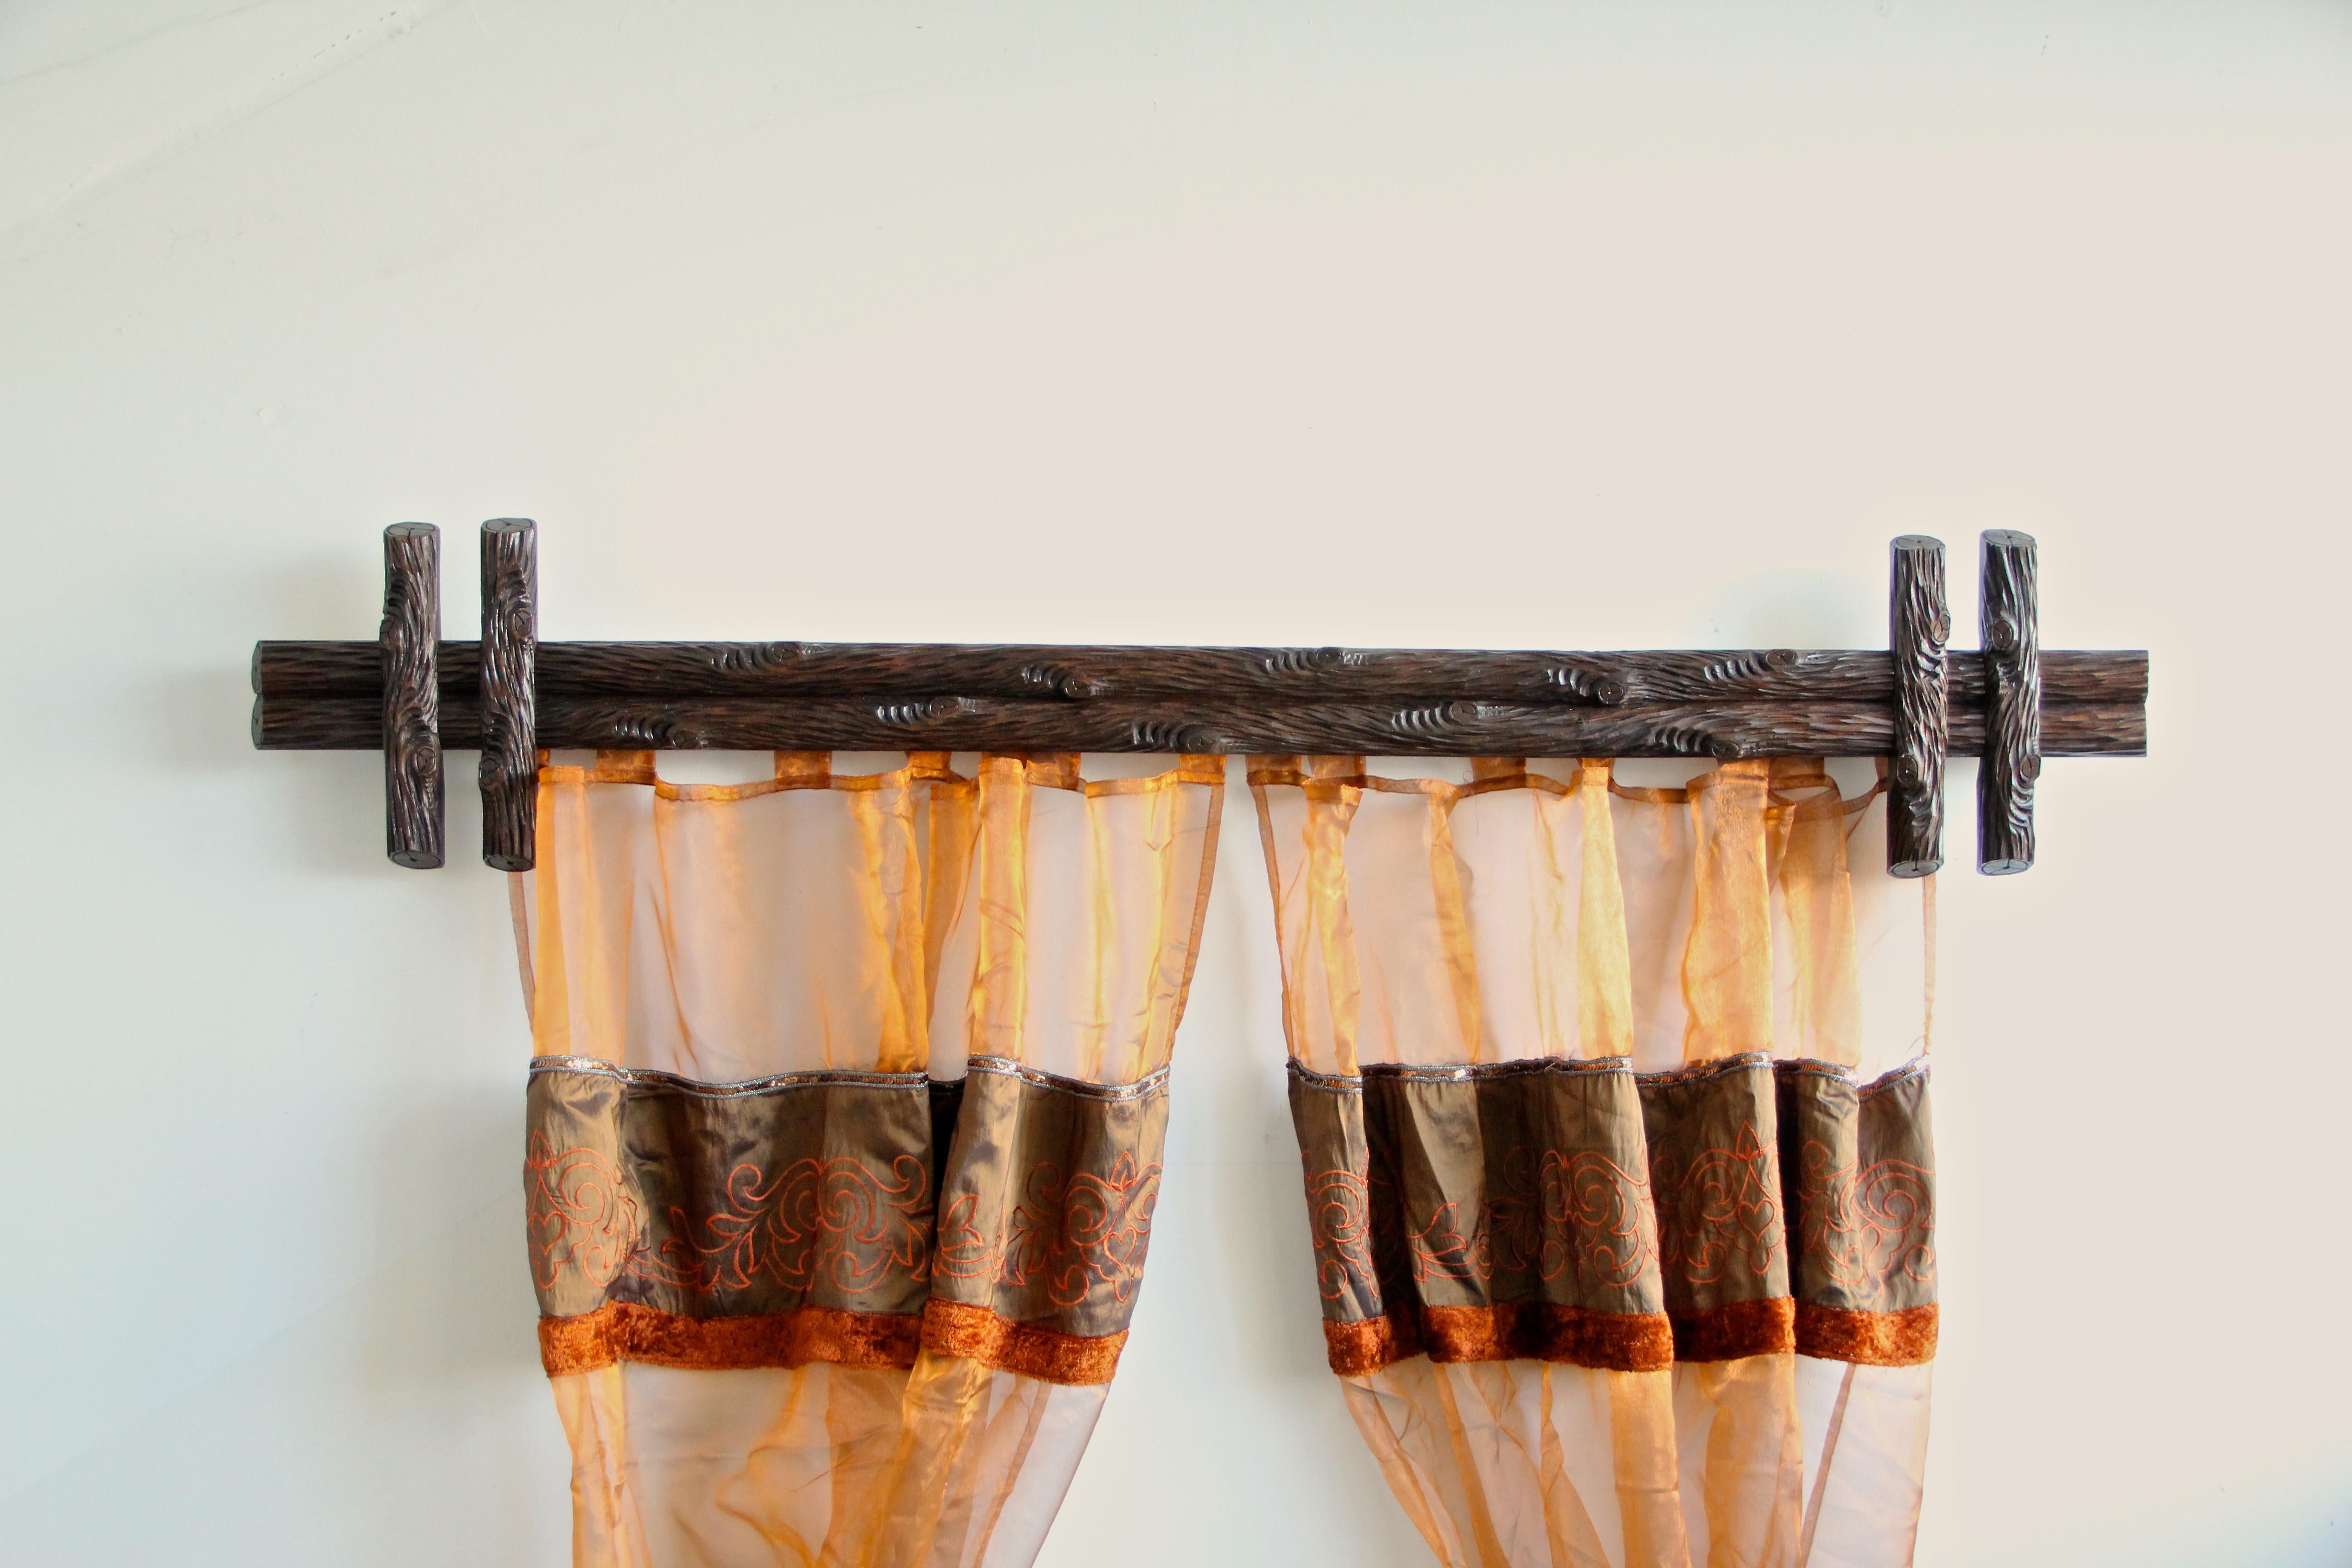 Extraordinary rare pair of Black Forest rustic curtain rods from the late 19th century in Germany, circa 1880. These artfully hand carved curtain rods impress with a very unique 